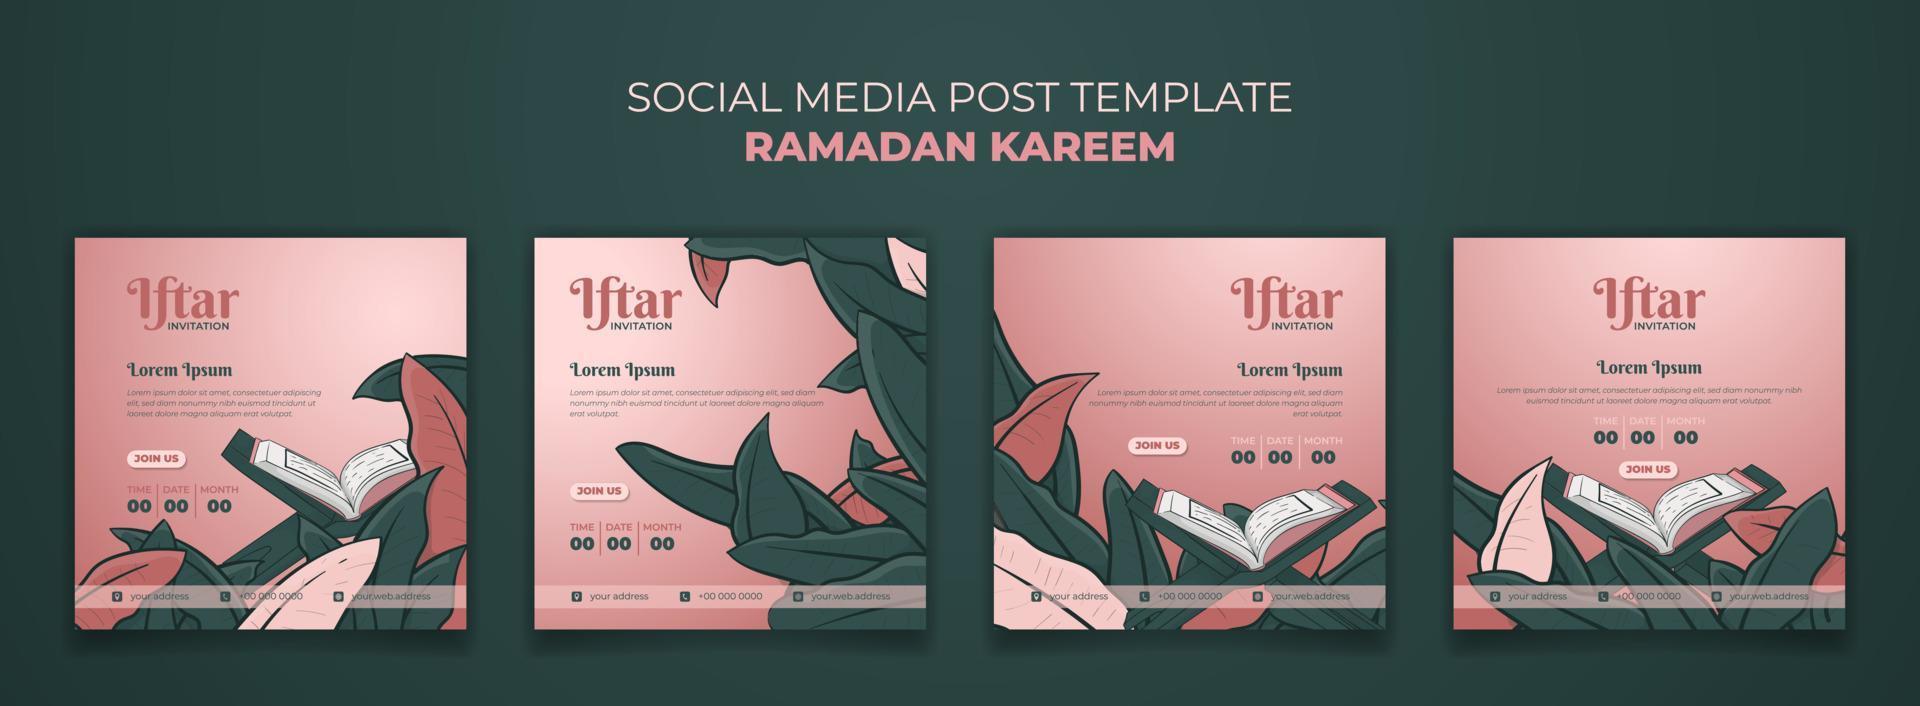 social media post template with qur'an and green leaves background in hand drawn design vector